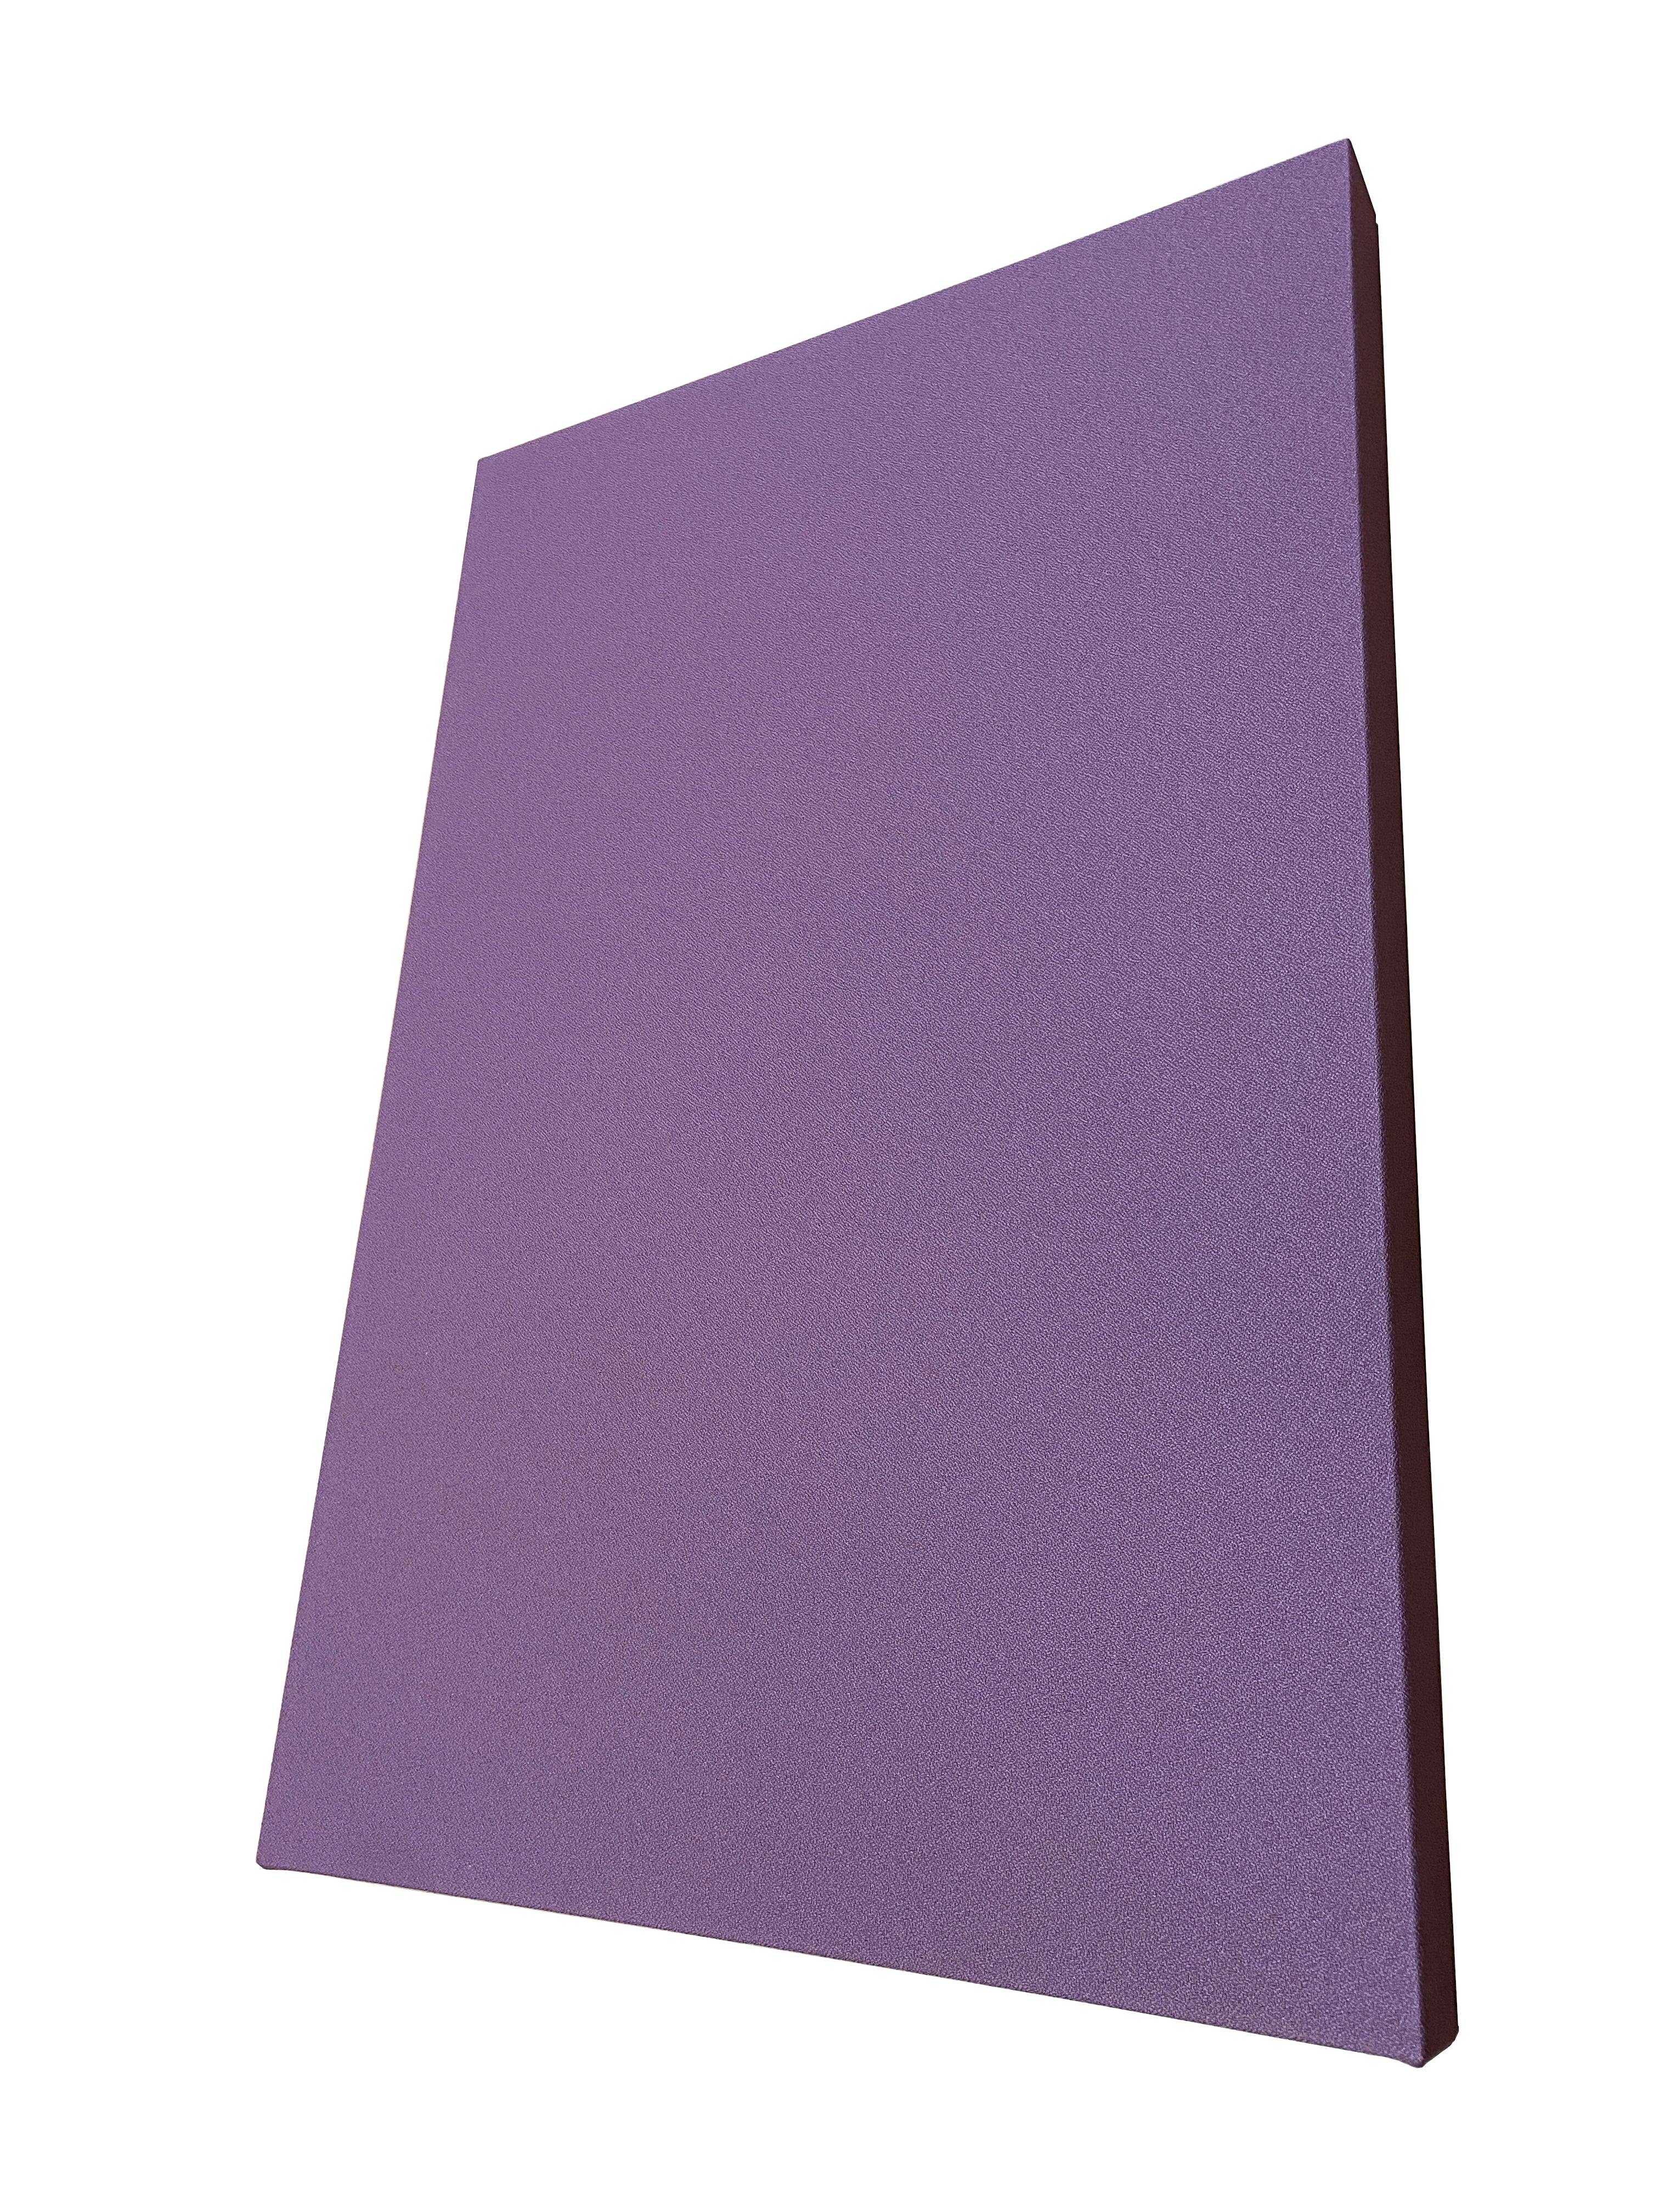 2" SoundControl Wall Mounted Acoustic Panel 2ft by 3ft-1